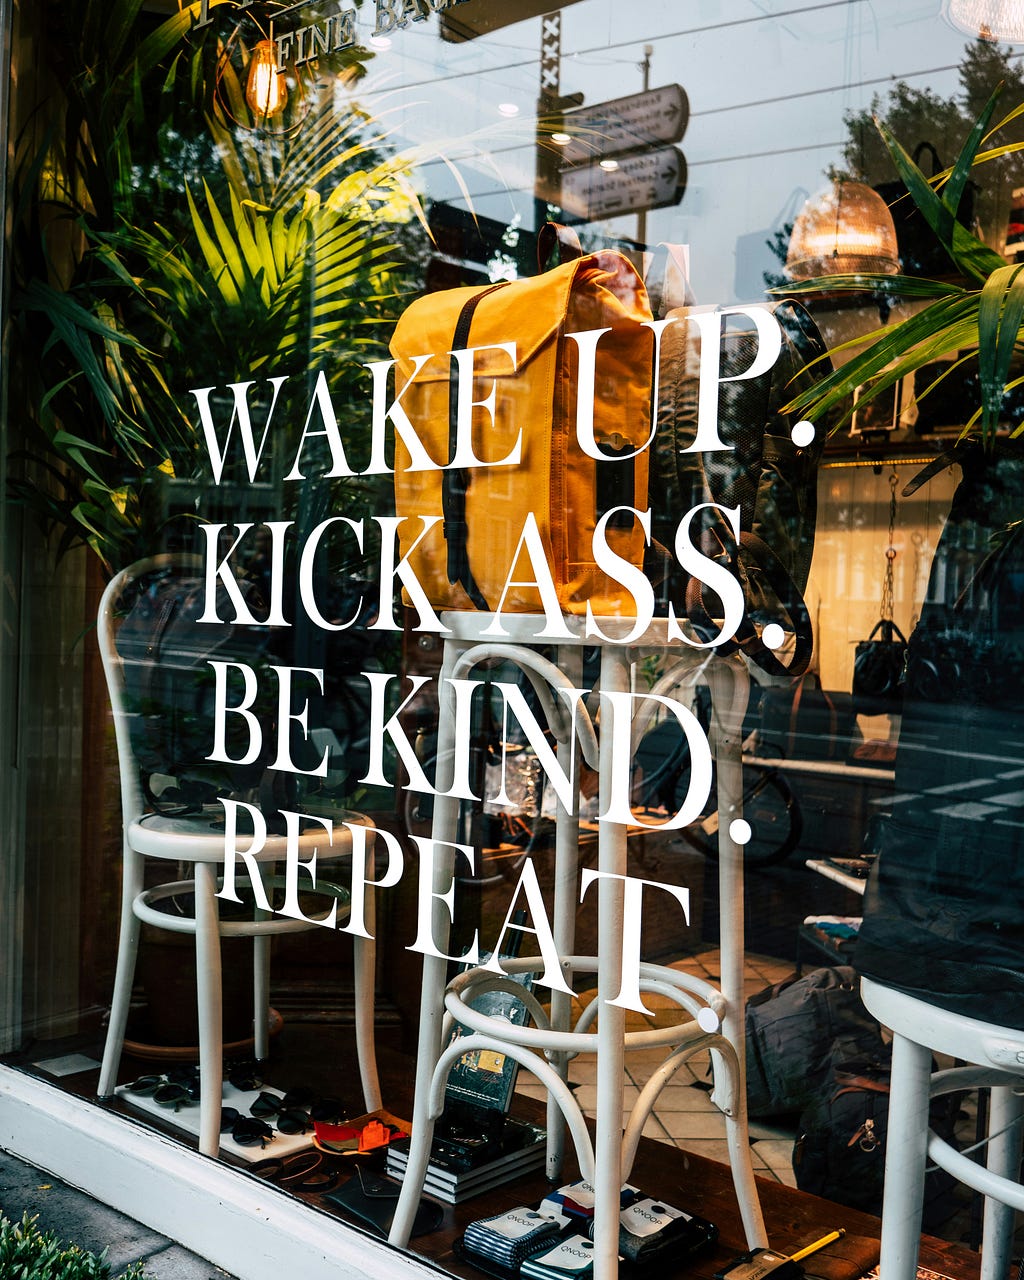 It’s a shop window filled with items to purchase. Written on the window is Wake up. Kick Ass. Be Kind. Repeat.